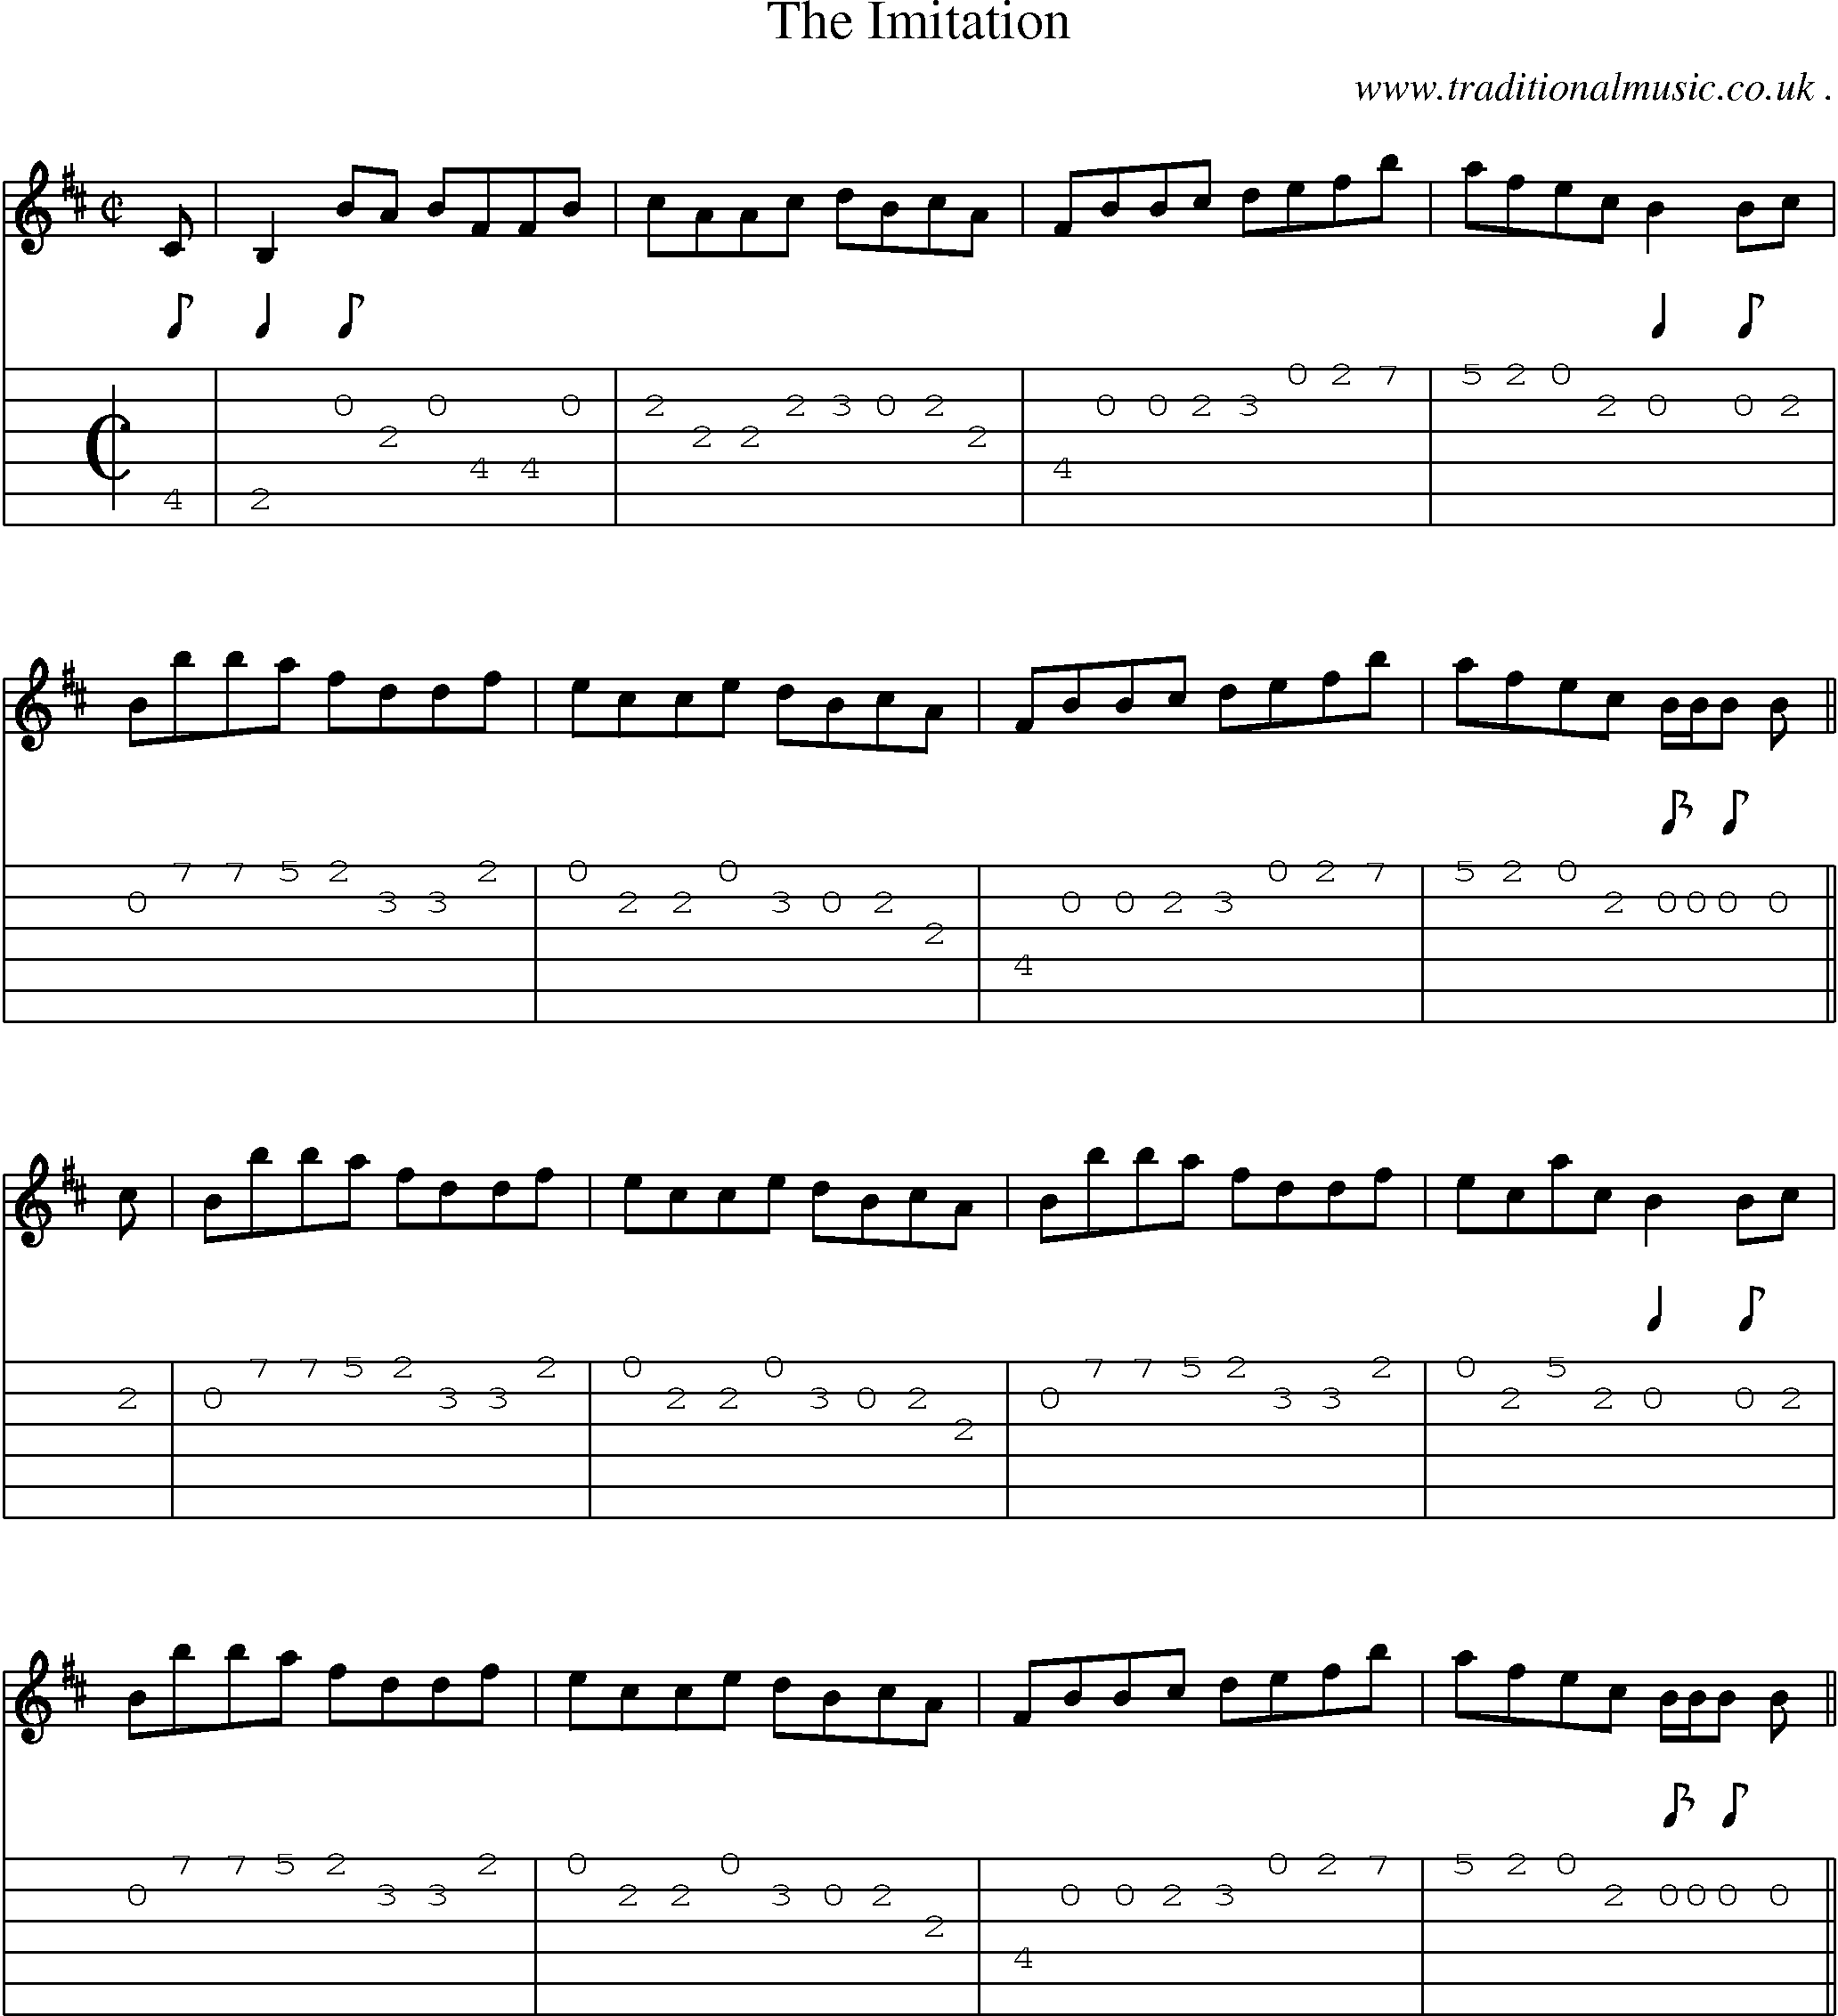 Sheet-Music and Guitar Tabs for The Imitation